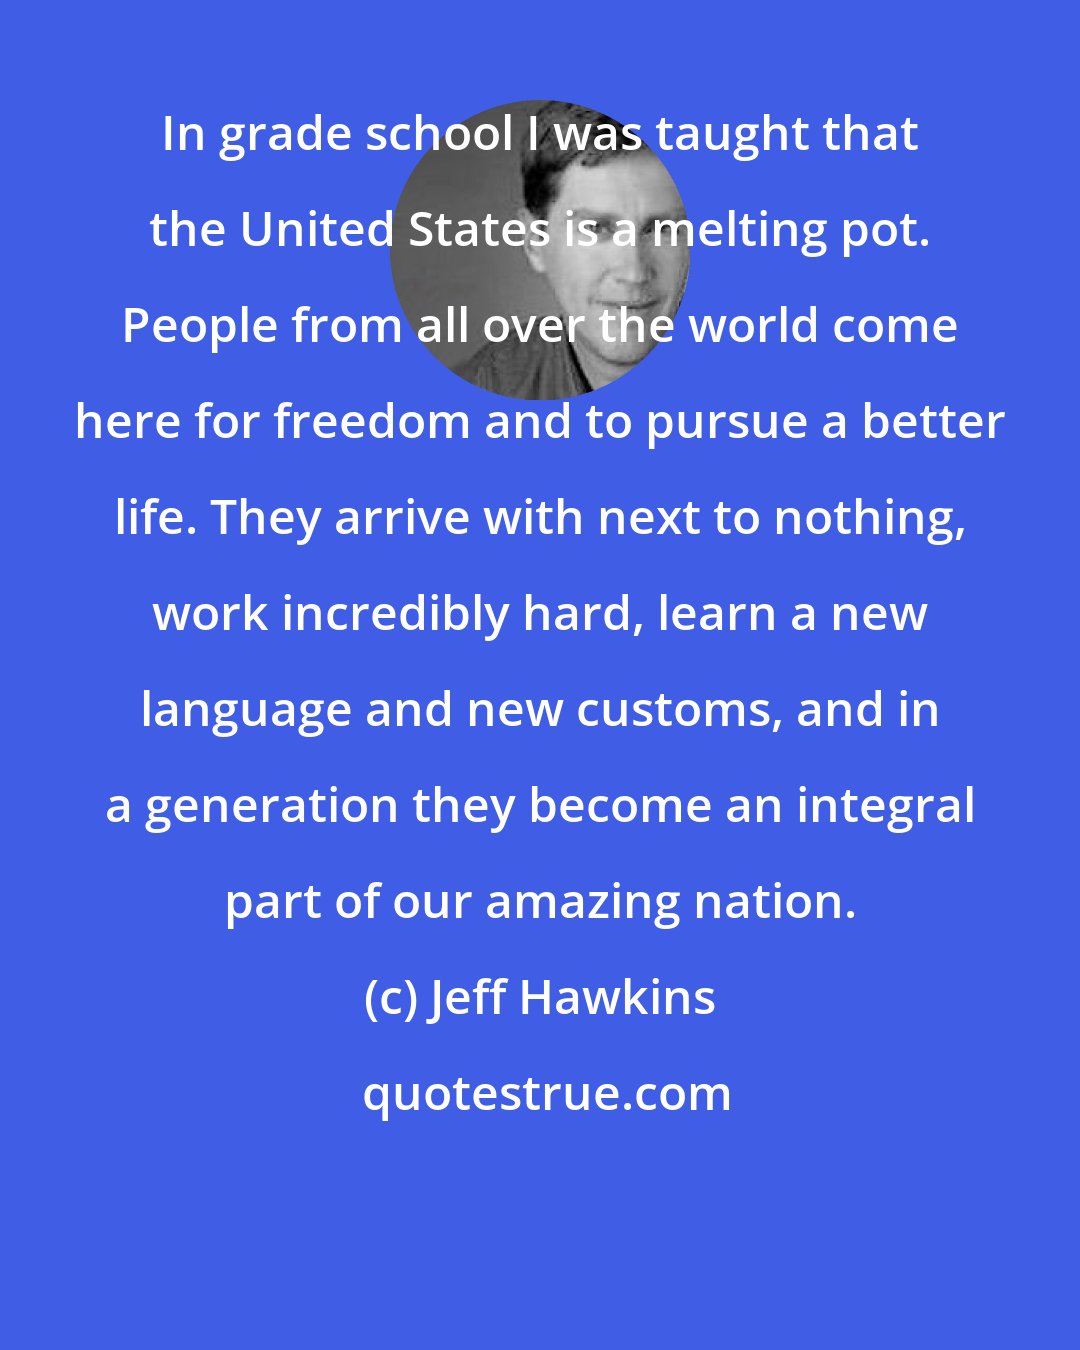 Jeff Hawkins: In grade school I was taught that the United States is a melting pot. People from all over the world come here for freedom and to pursue a better life. They arrive with next to nothing, work incredibly hard, learn a new language and new customs, and in a generation they become an integral part of our amazing nation.